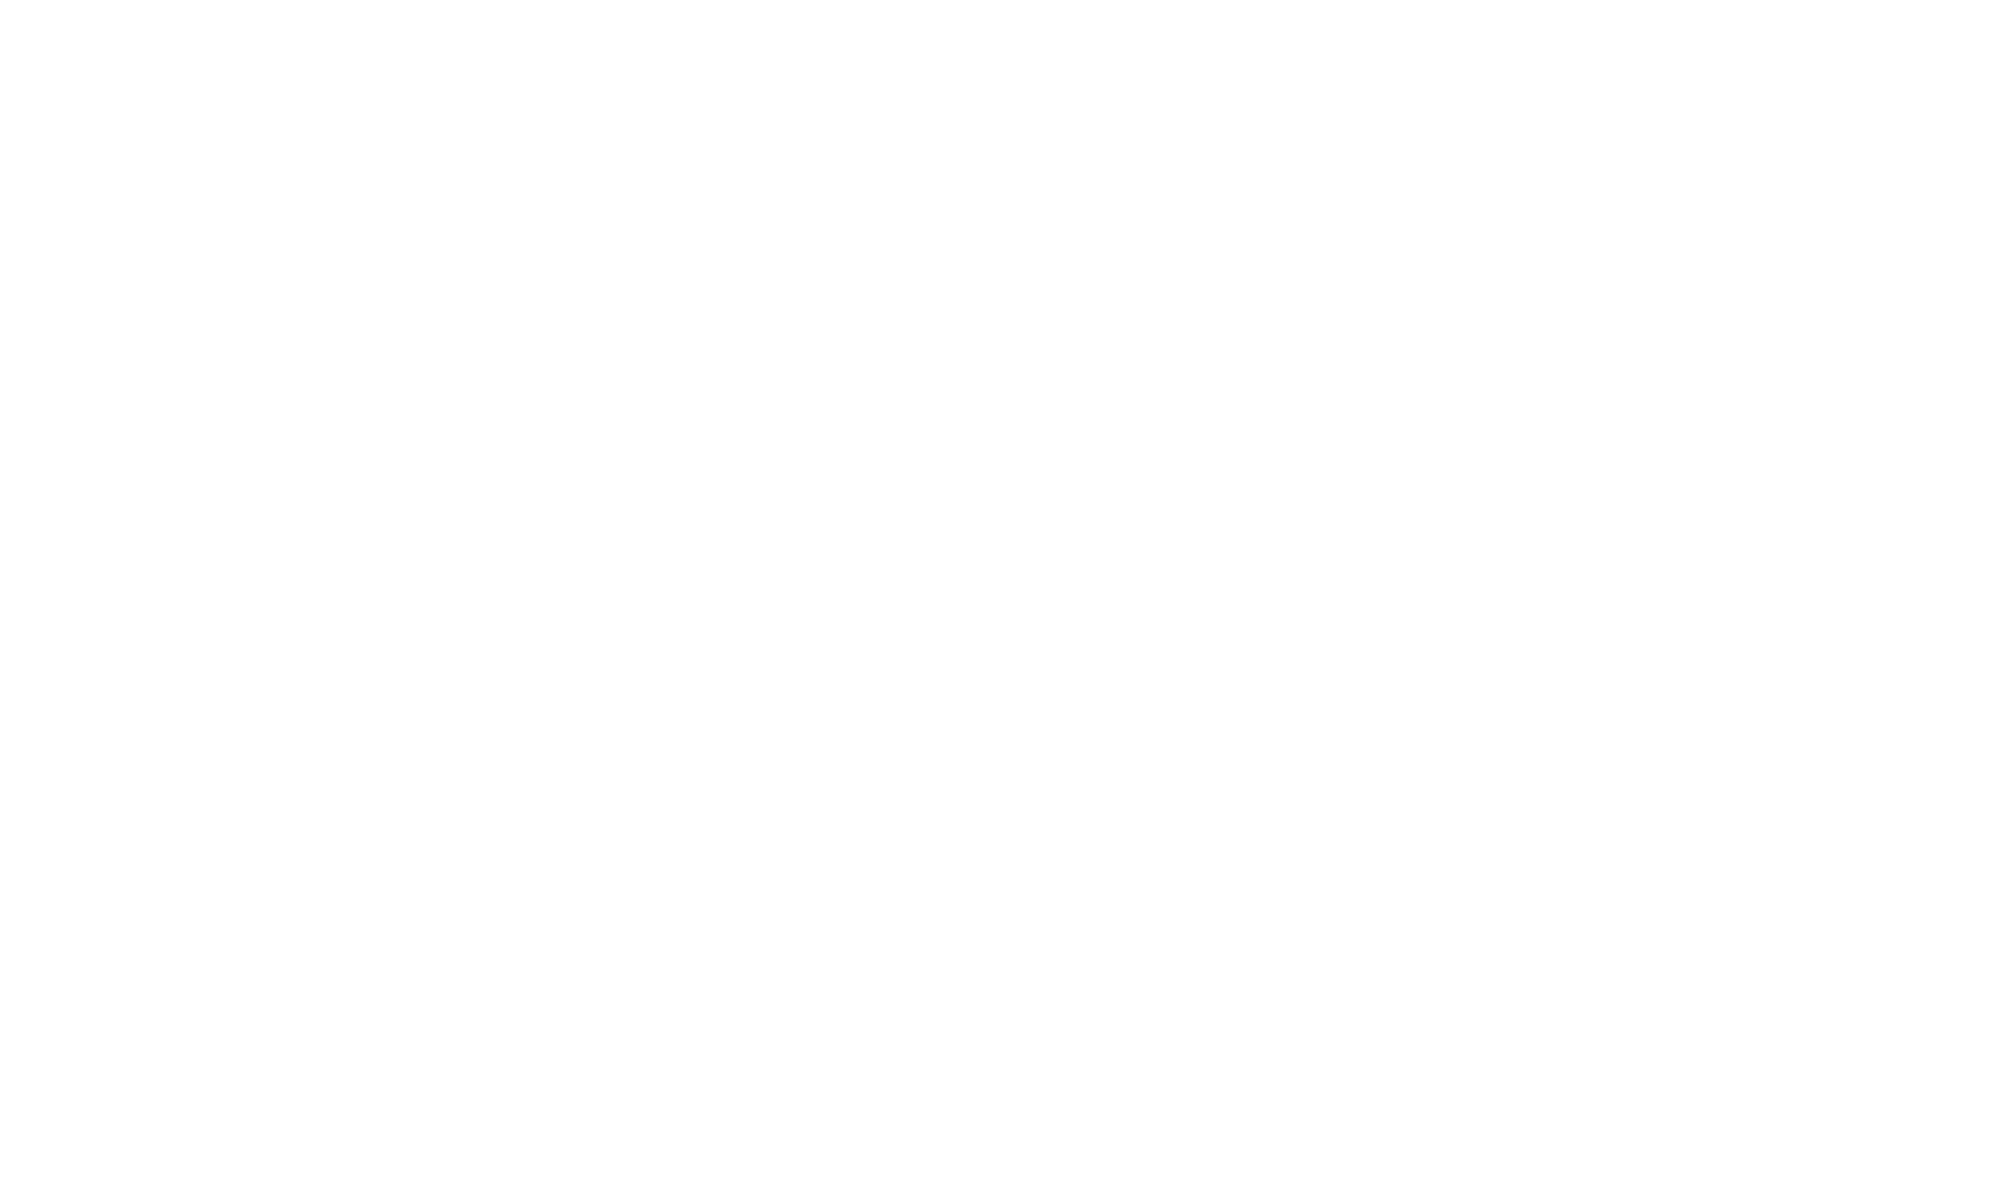 Clear Scope Background White